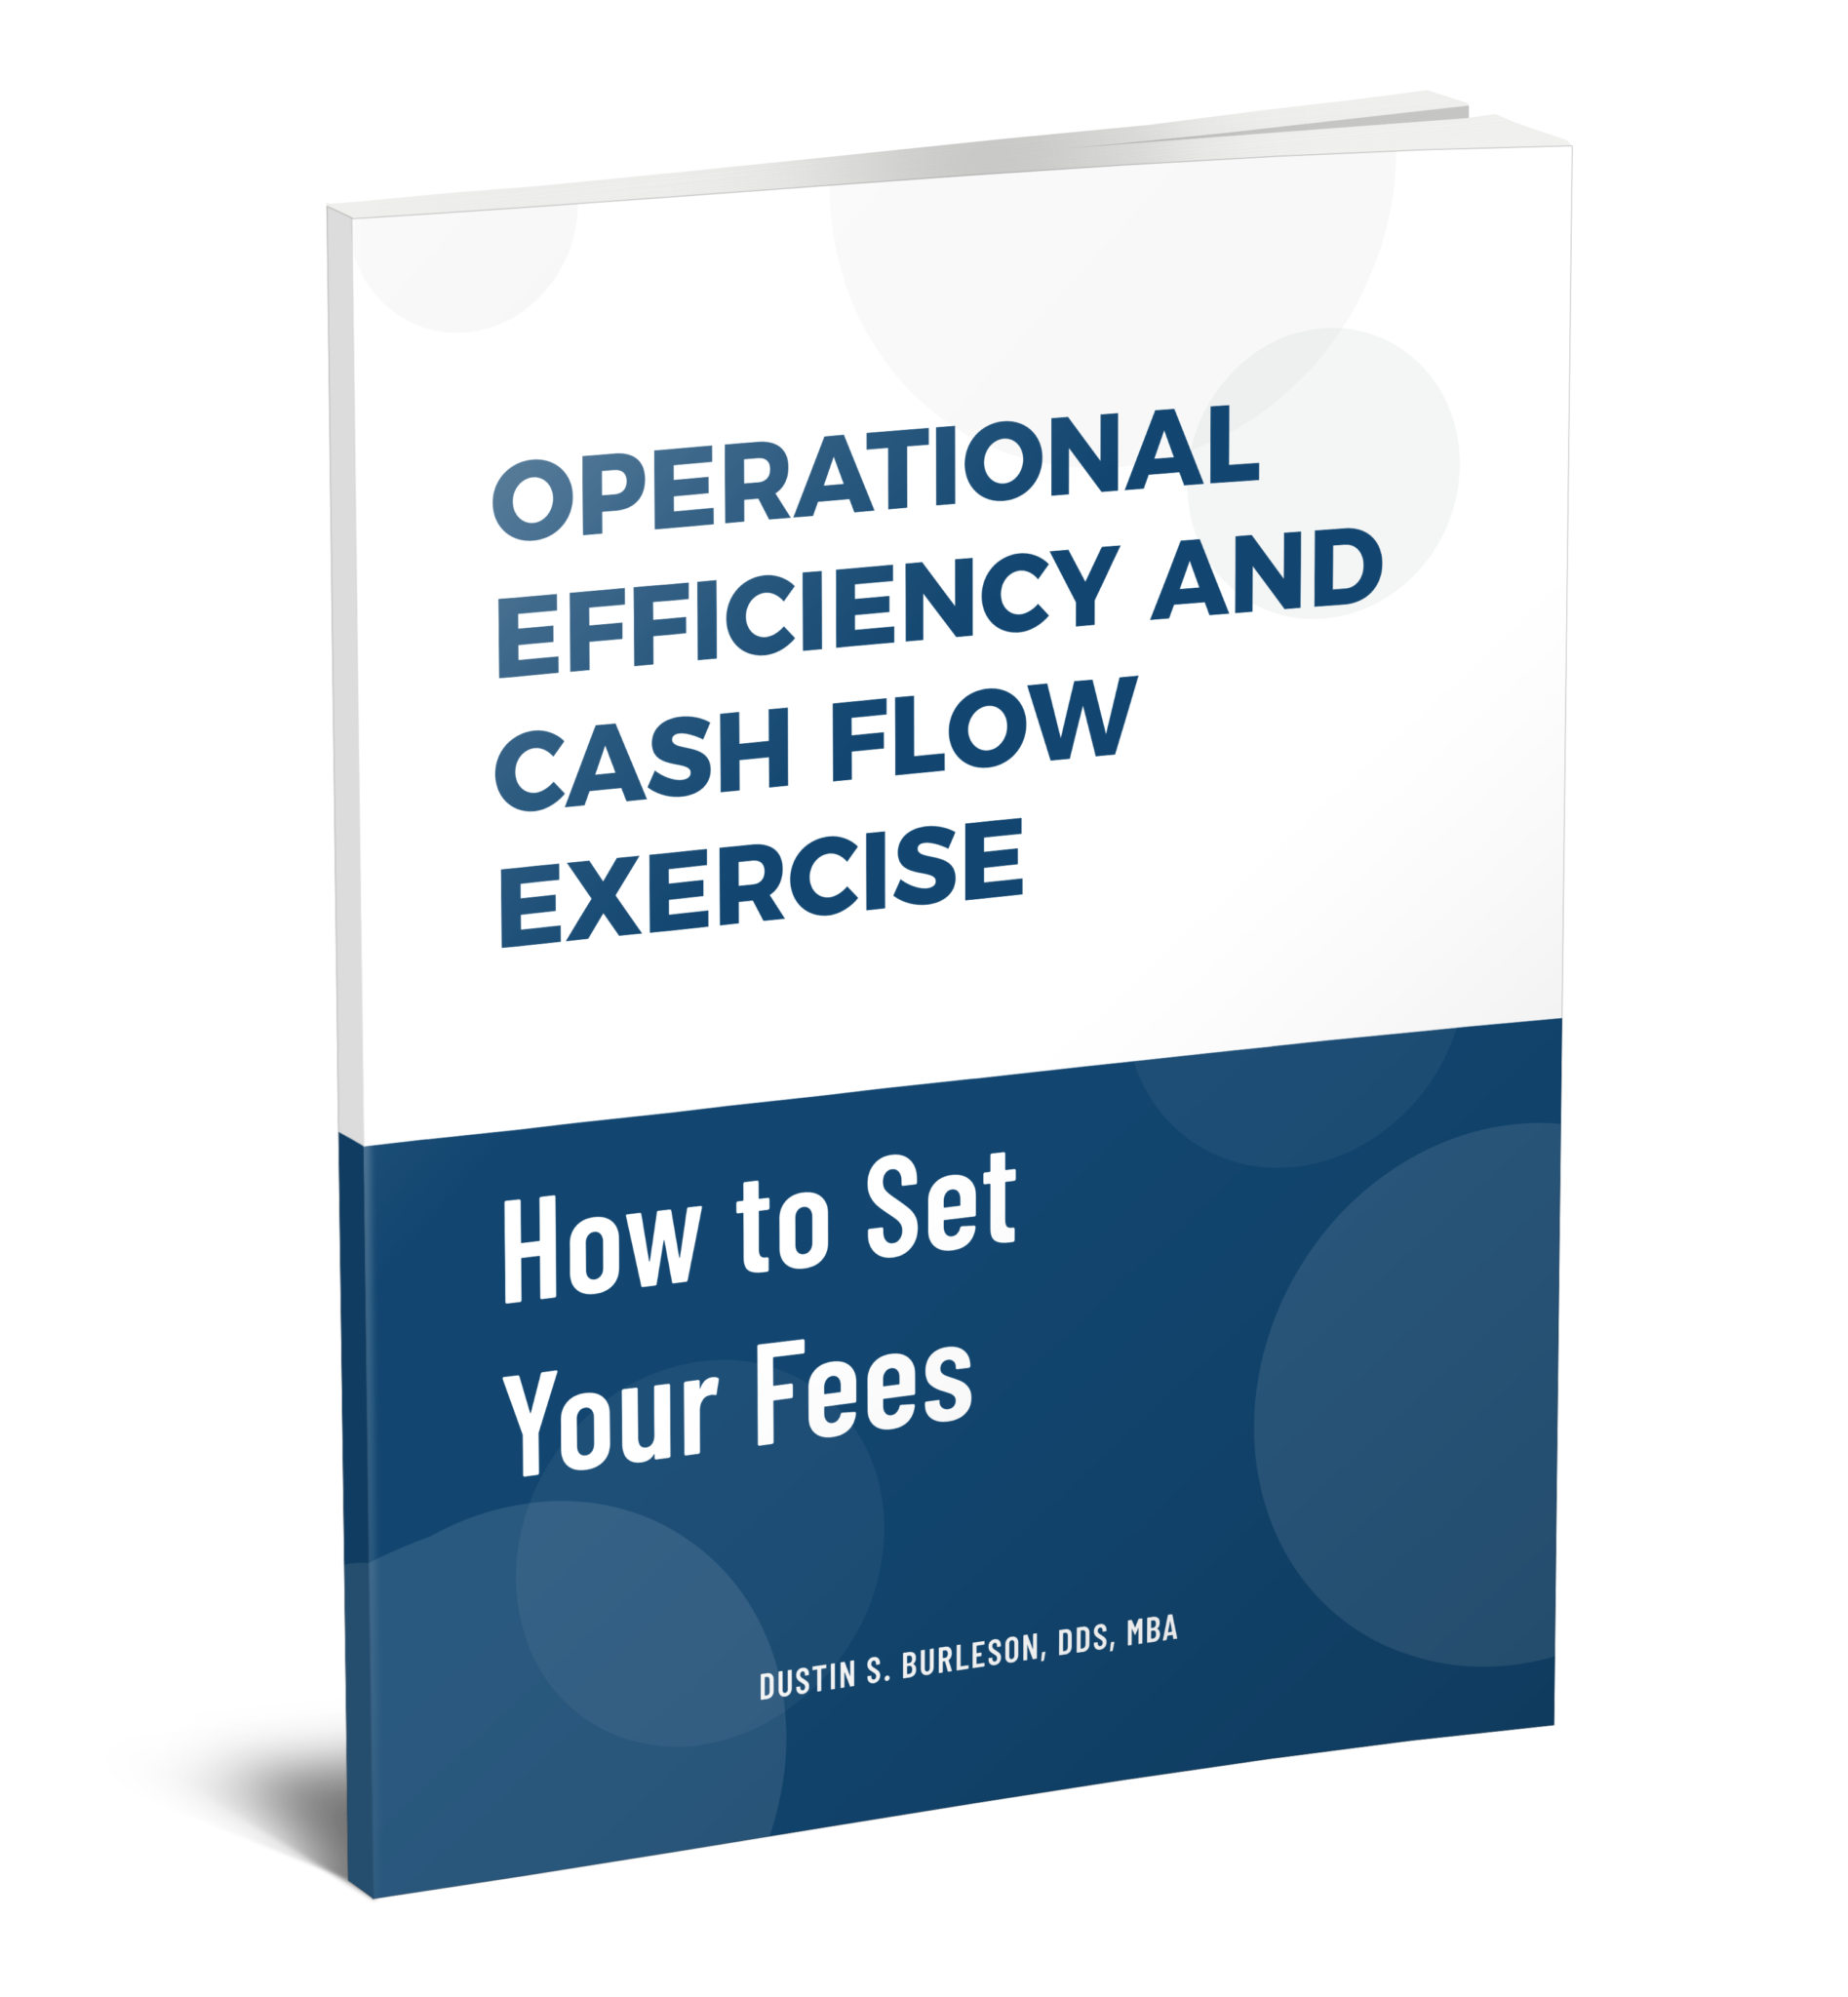 How to Set Your Fees: Operational Efficiency and Cash Flow Exercise